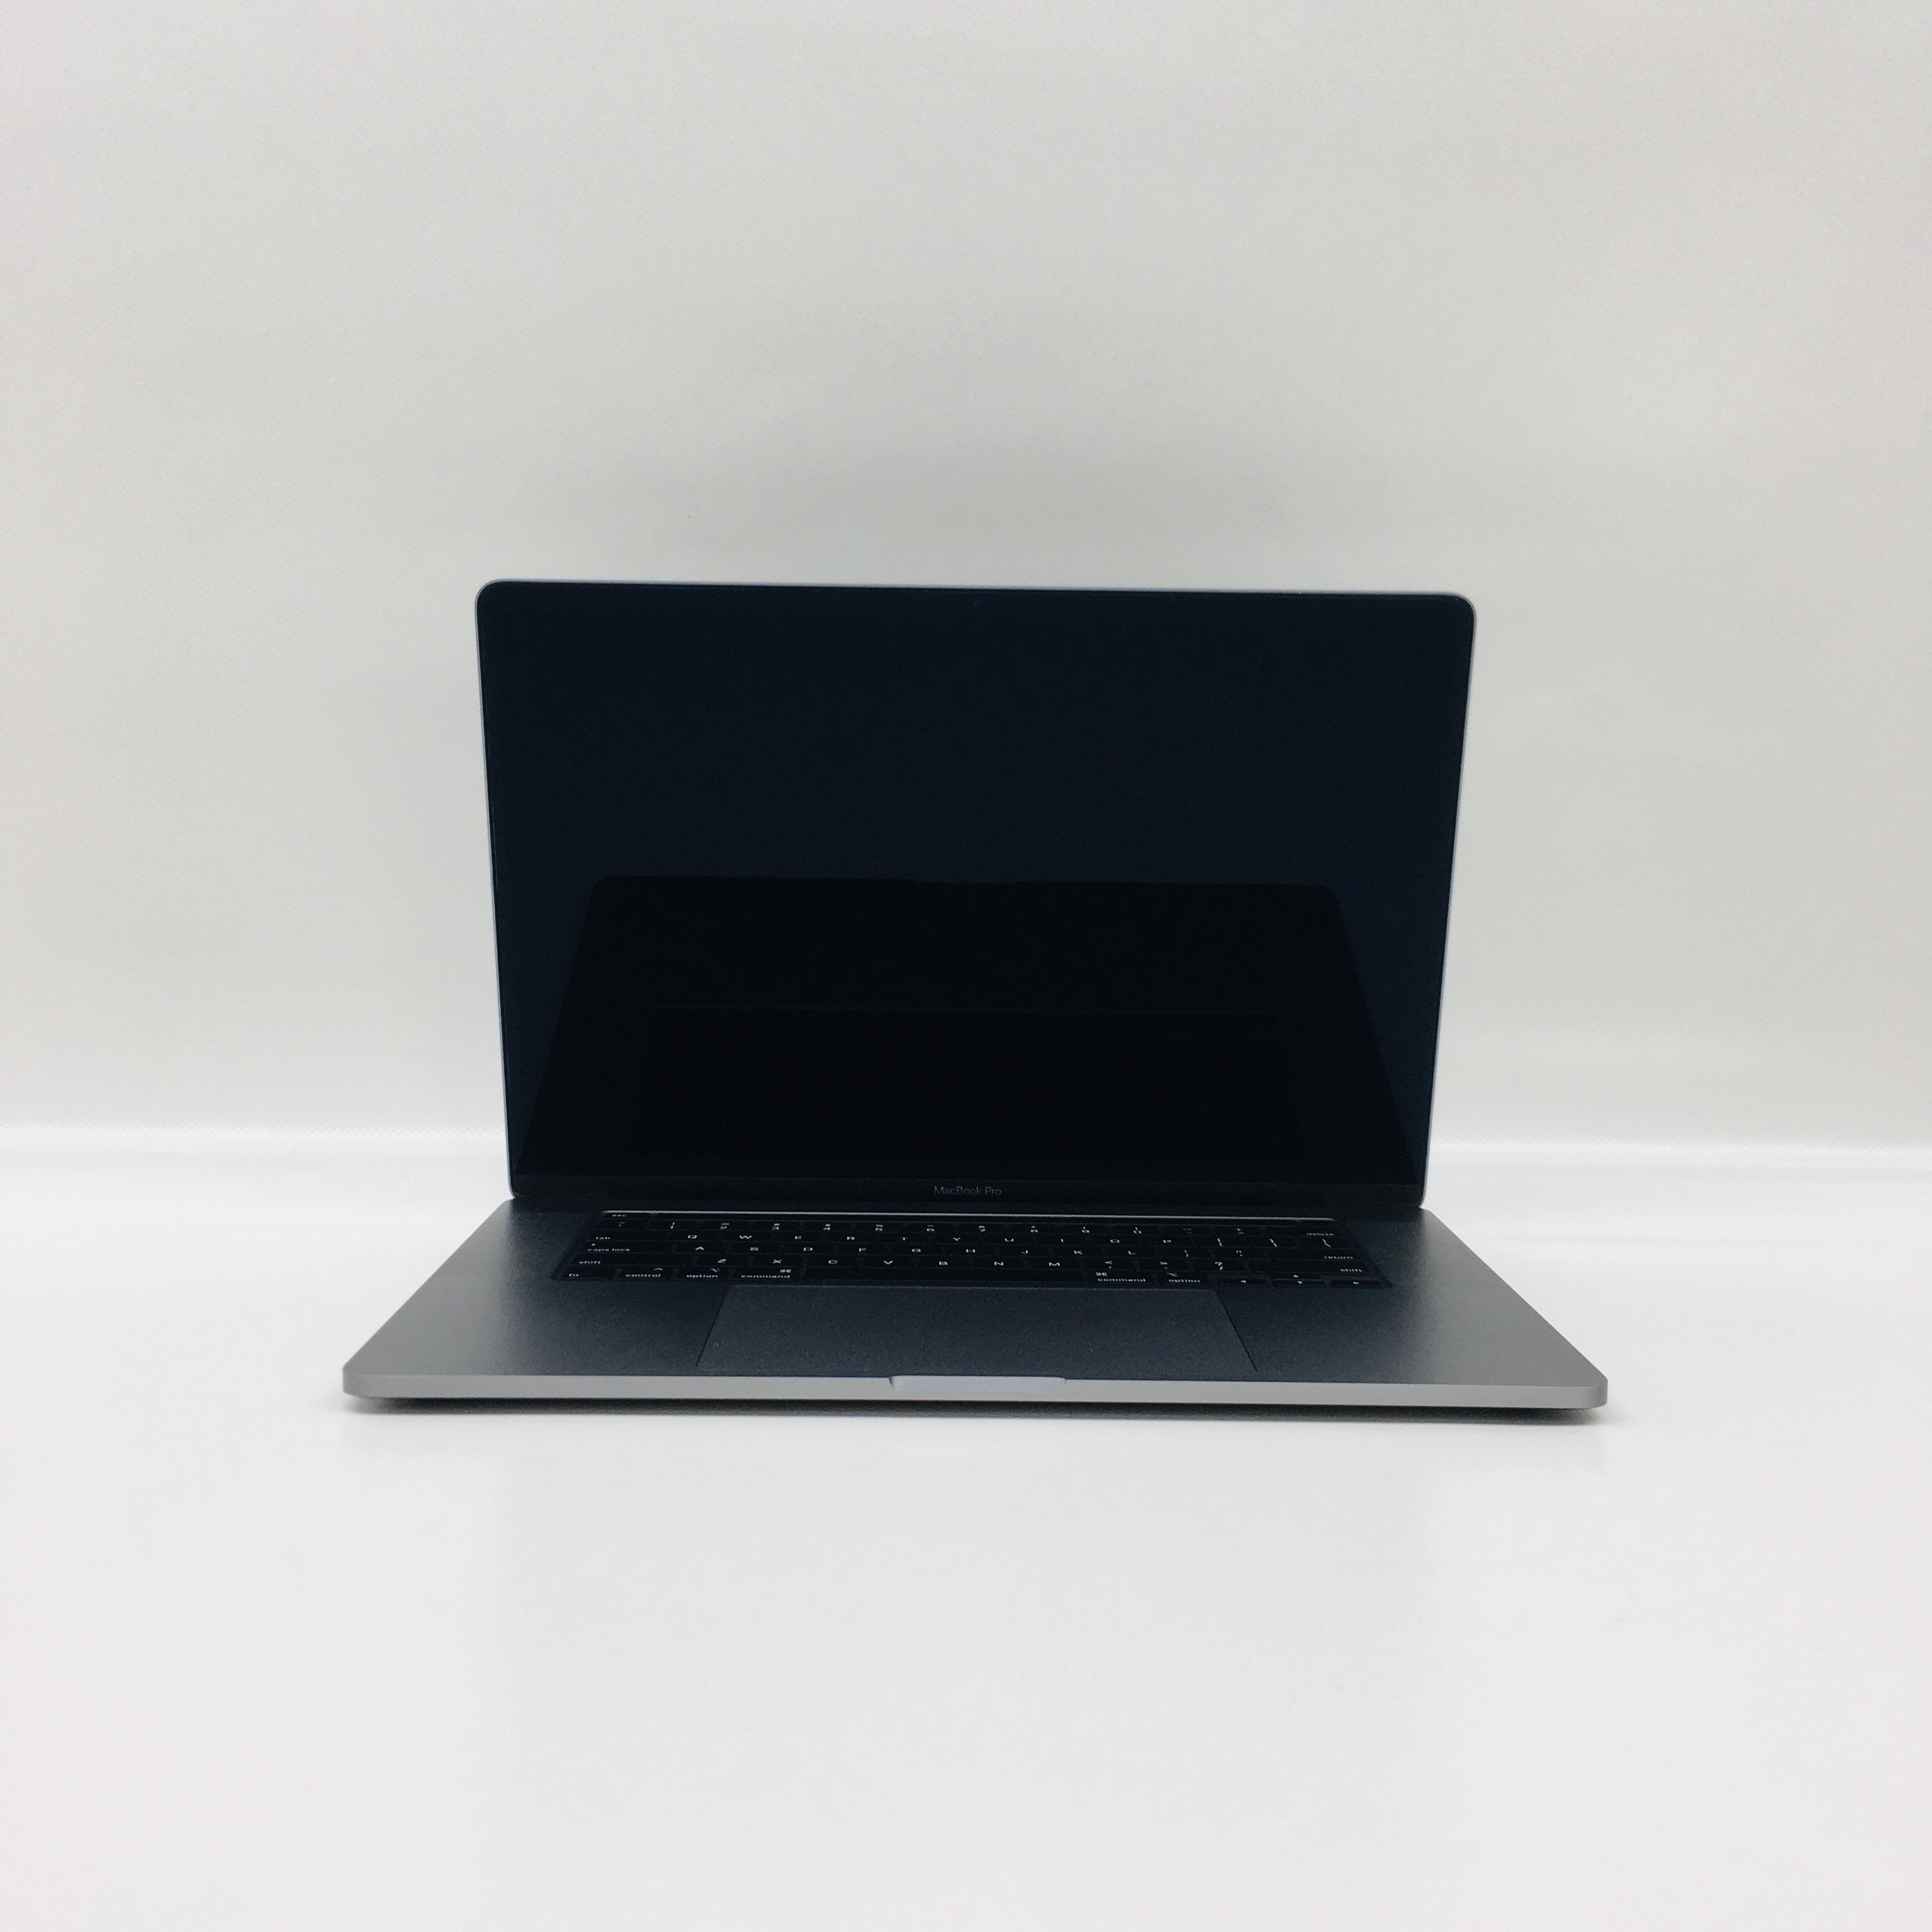 MacBook Pro 16" Touch Bar Late 2019 (Intel 6-Core i7 2.6 GHz 16 GB RAM 512 GB SSD), Space Gray, Intel 6-Core i7 2.6 GHz, 16 GB RAM, 512 GB SSD, image 1